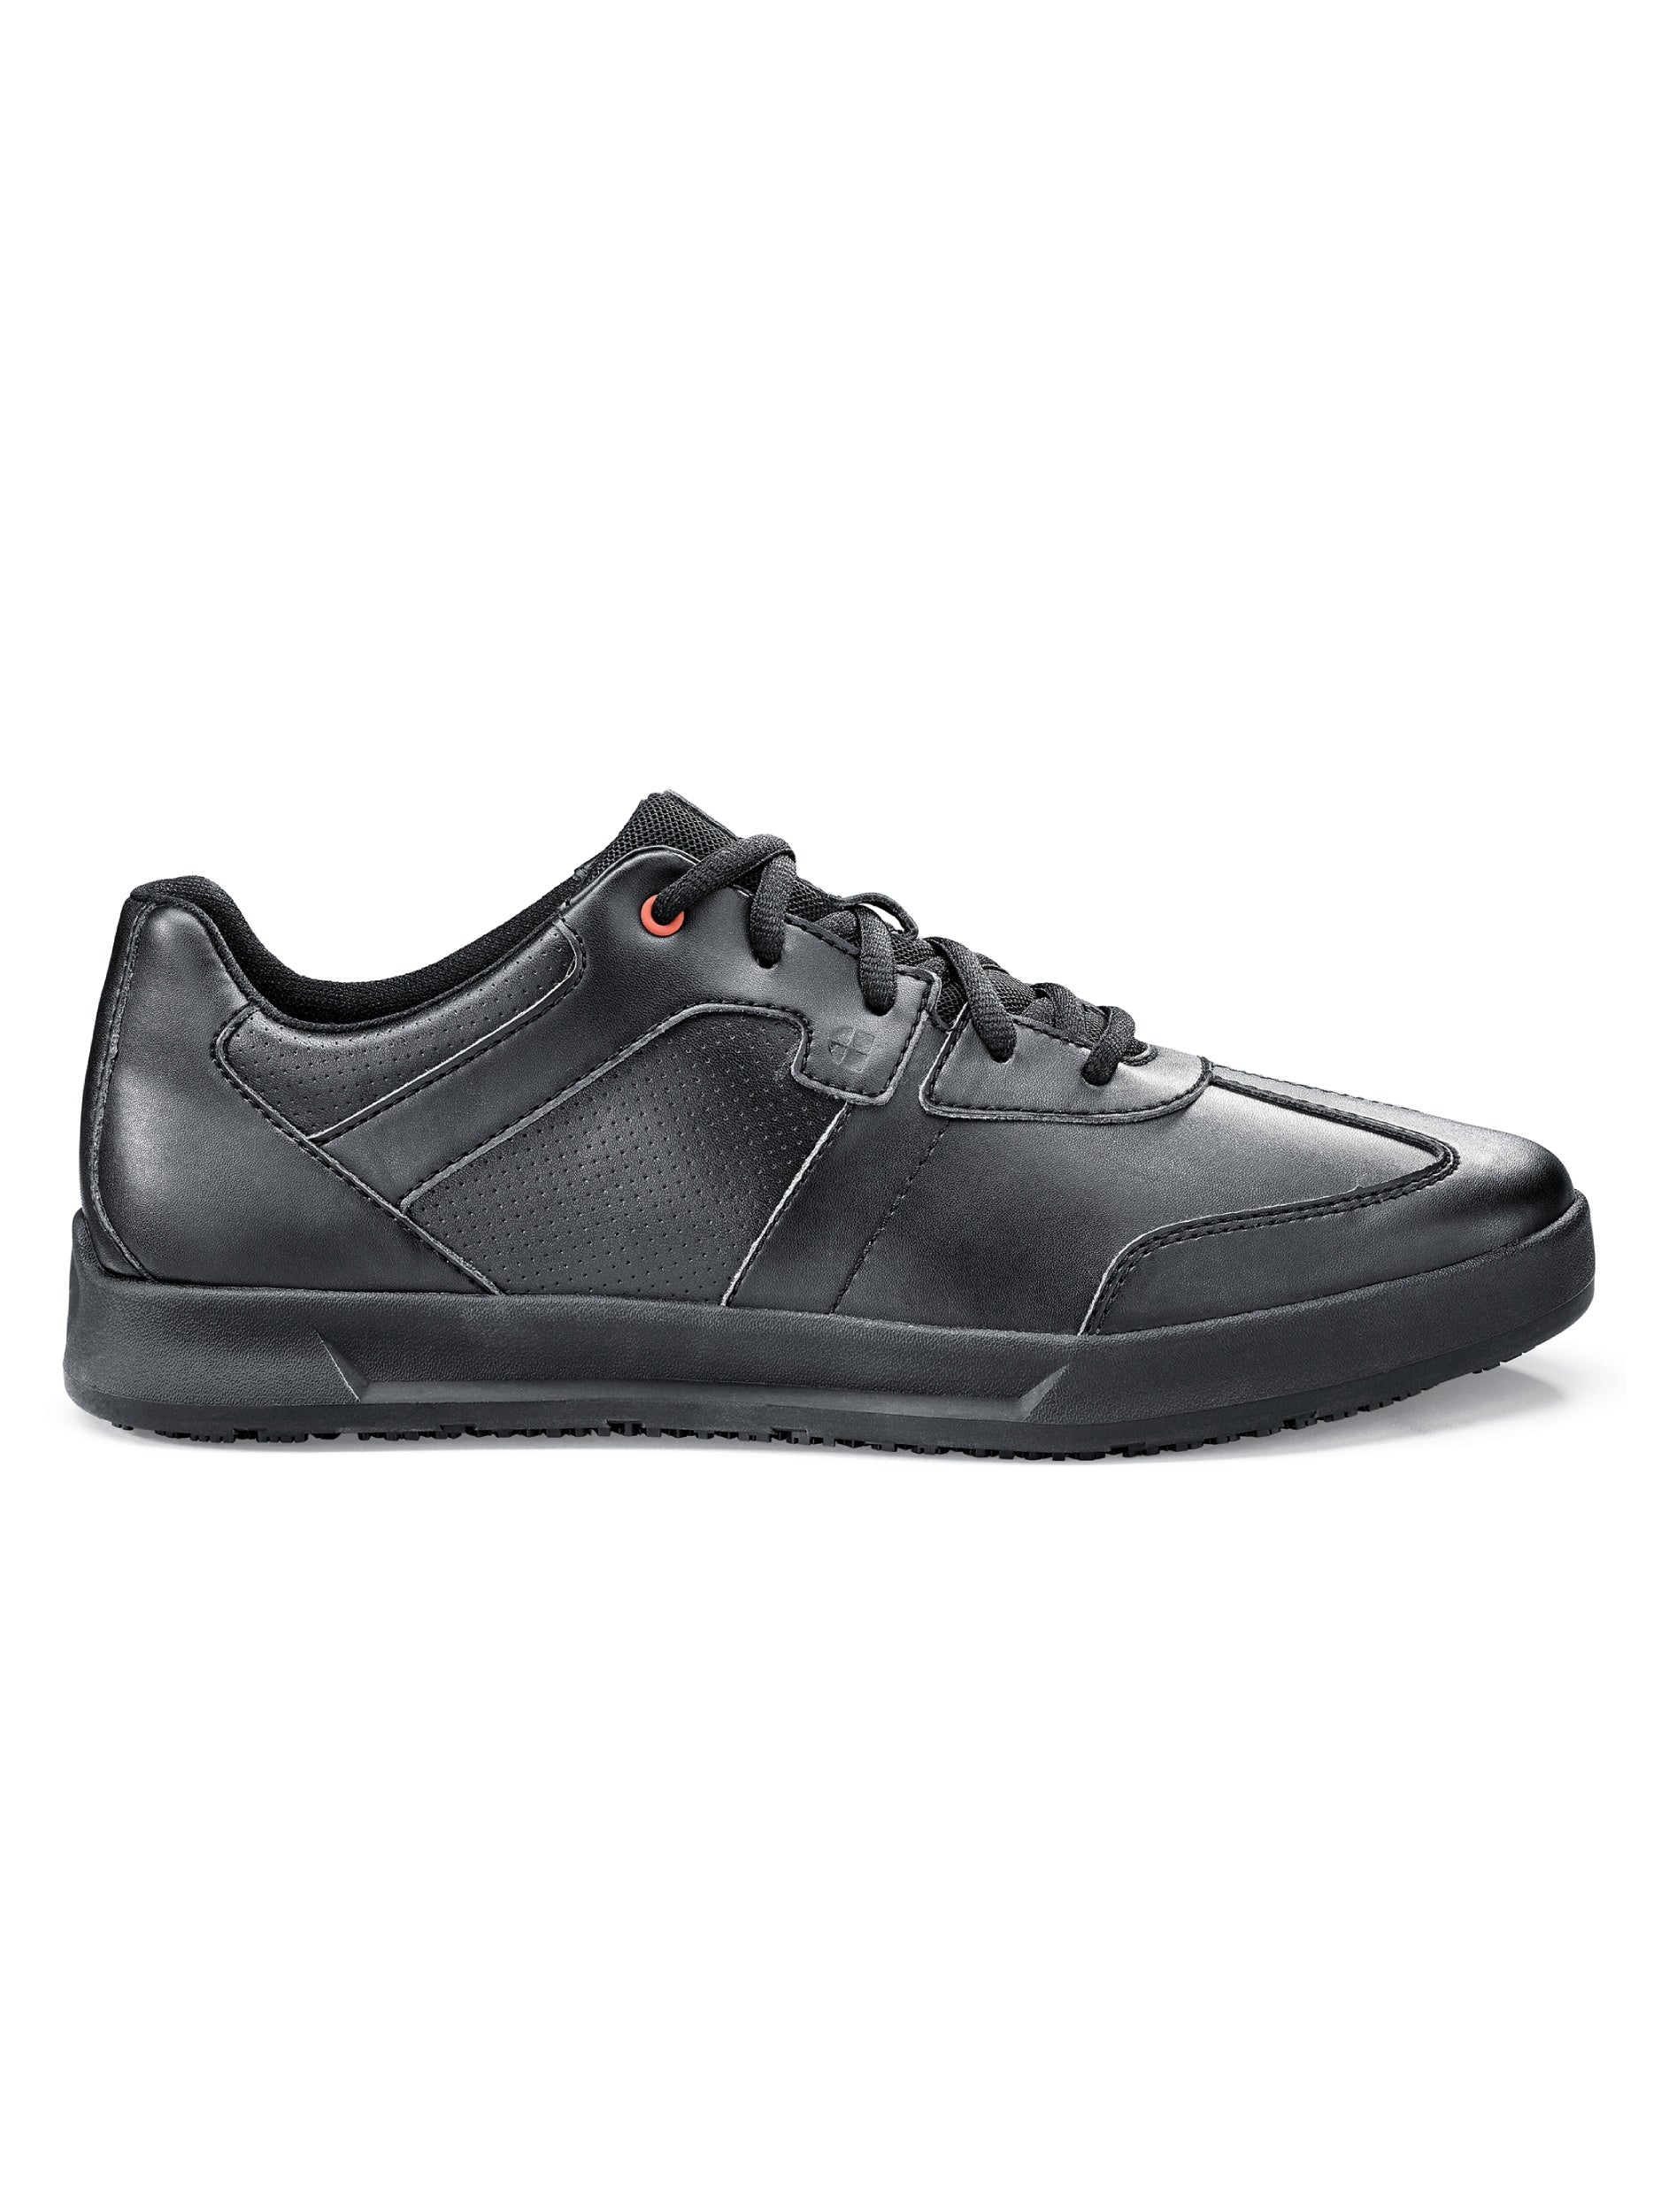 Women's Work Shoe Liberty Black by  Shoes For Crews.